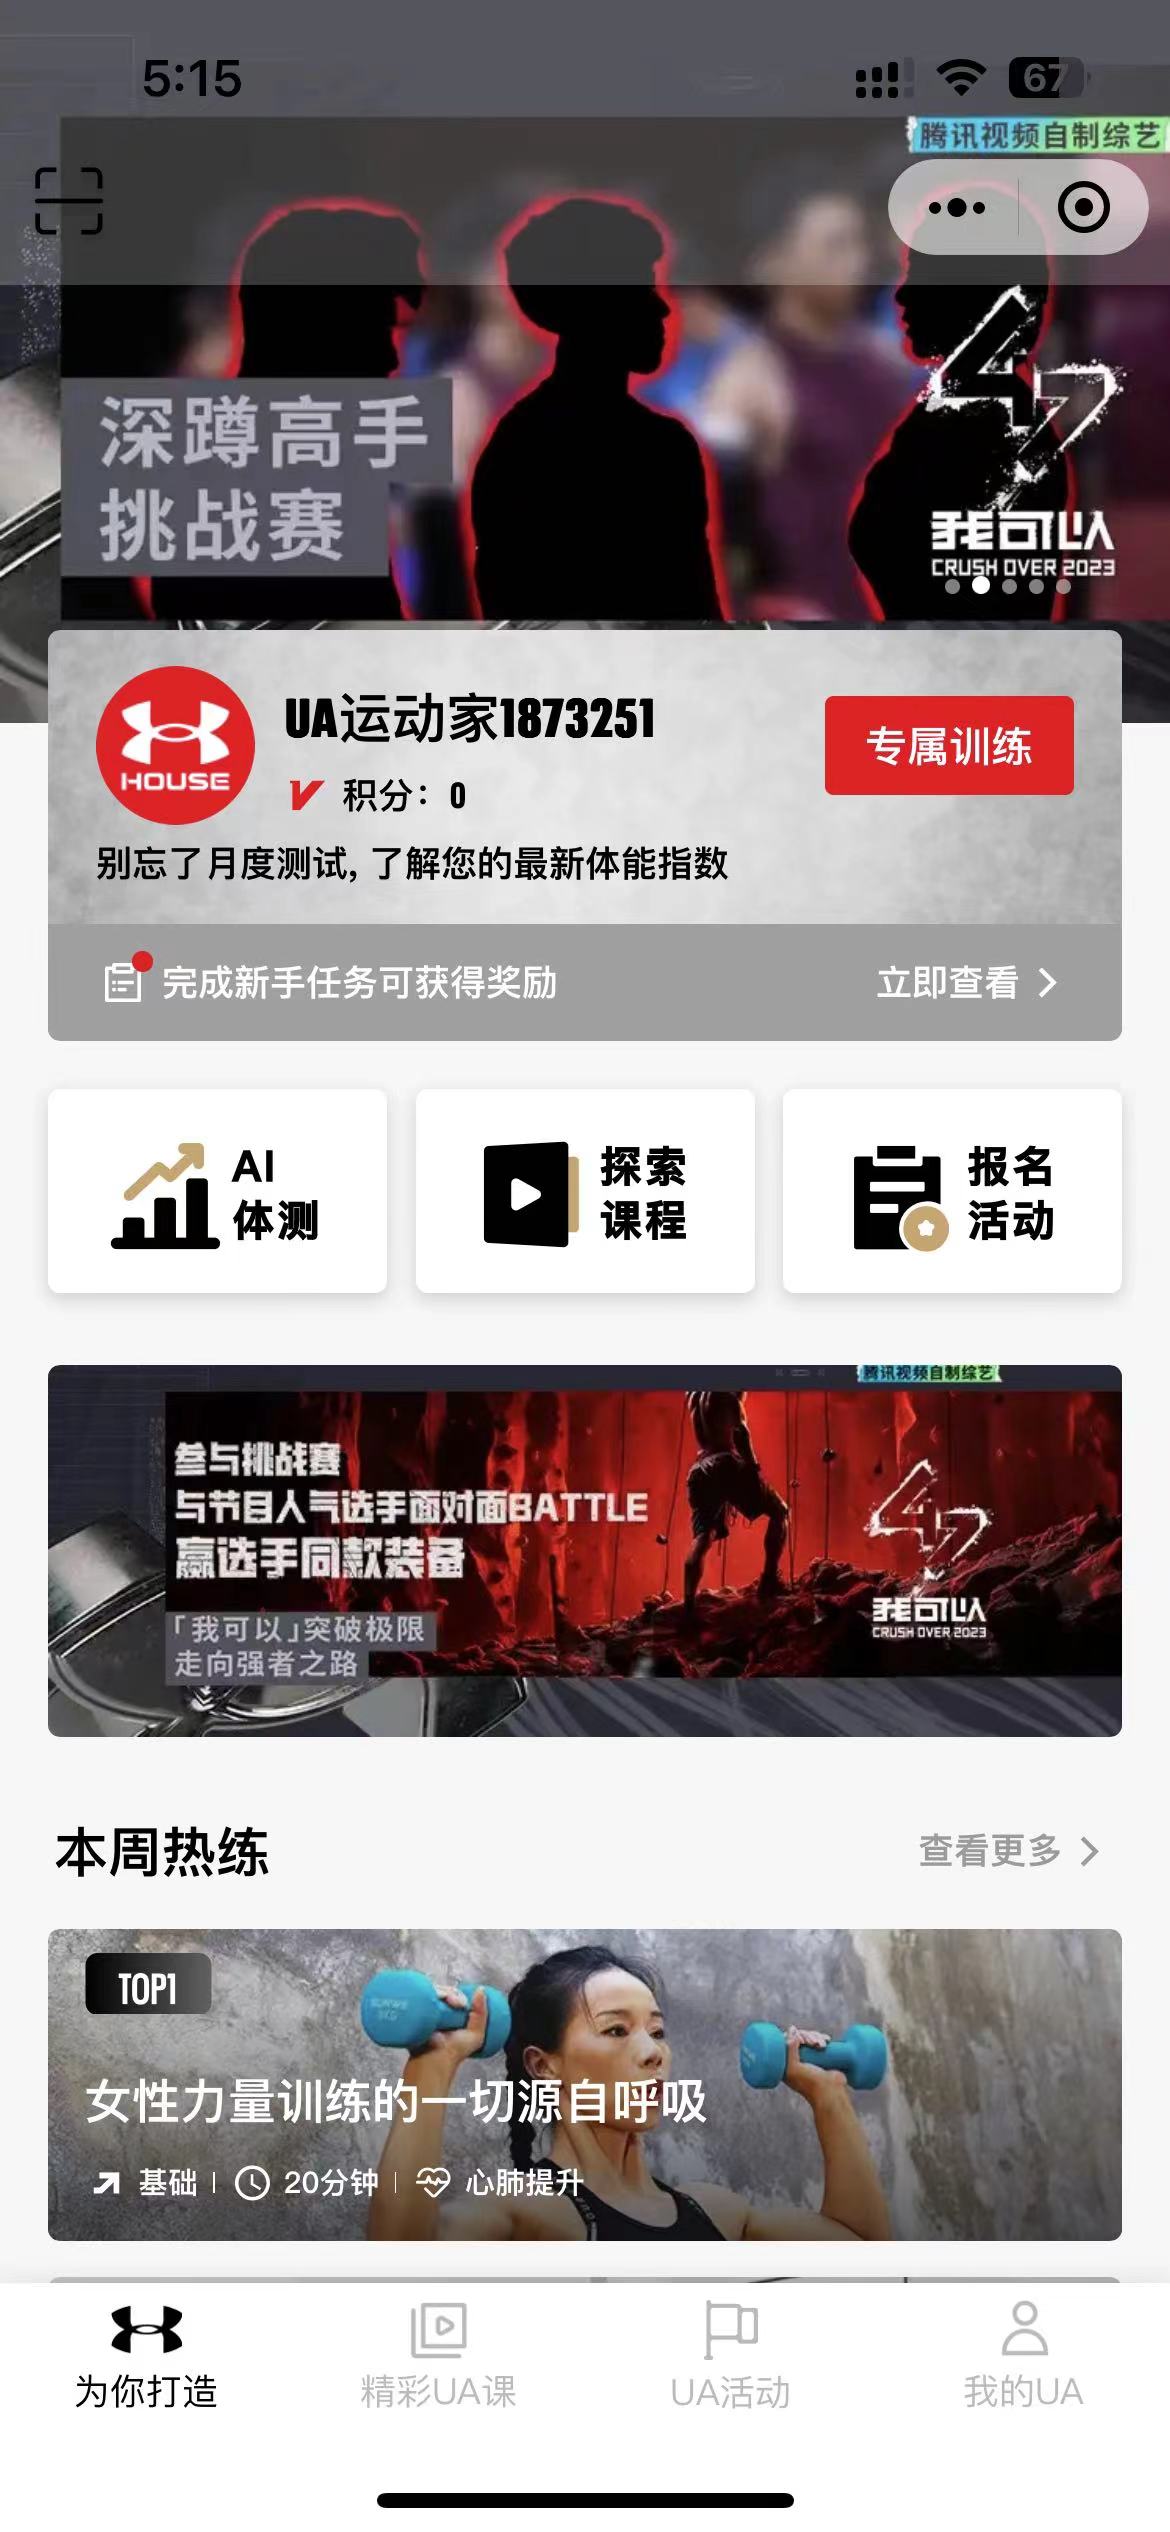 Under Armour in China:  UA HOUSE WeChat mini-program